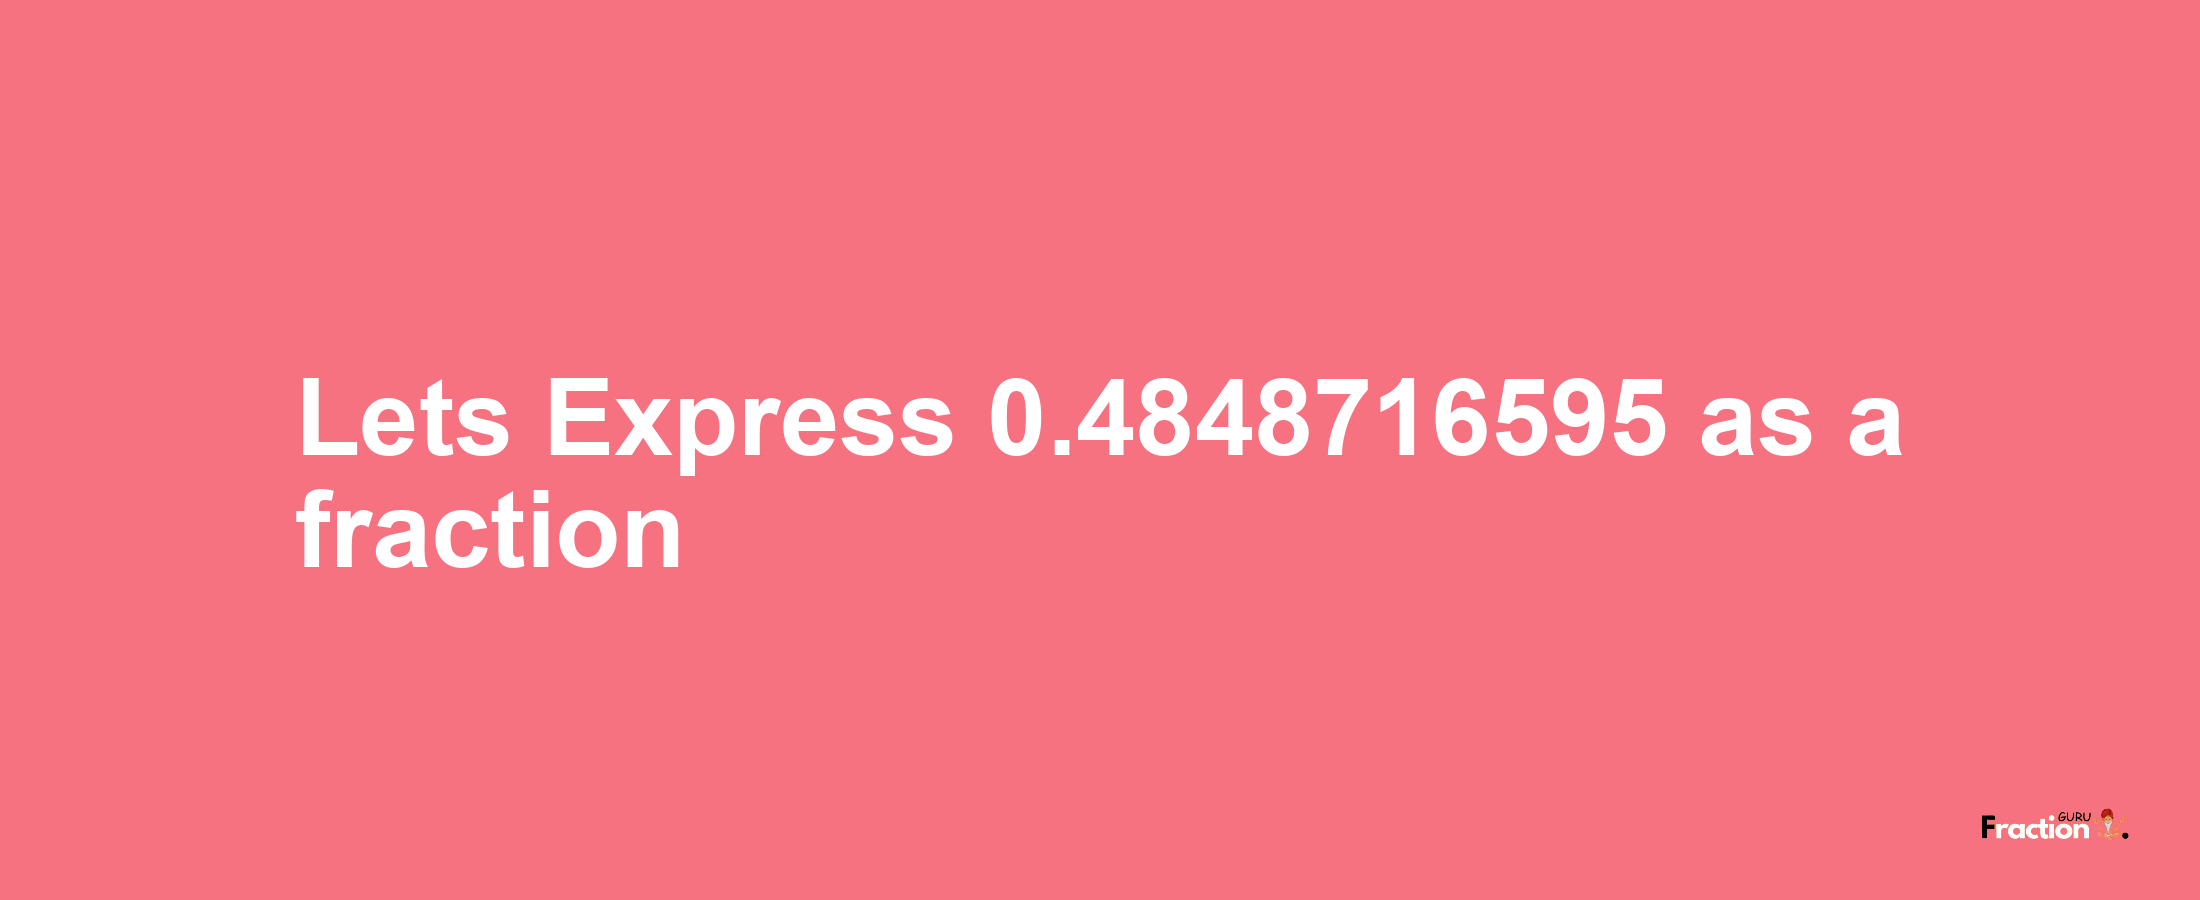 Lets Express 0.4848716595 as afraction